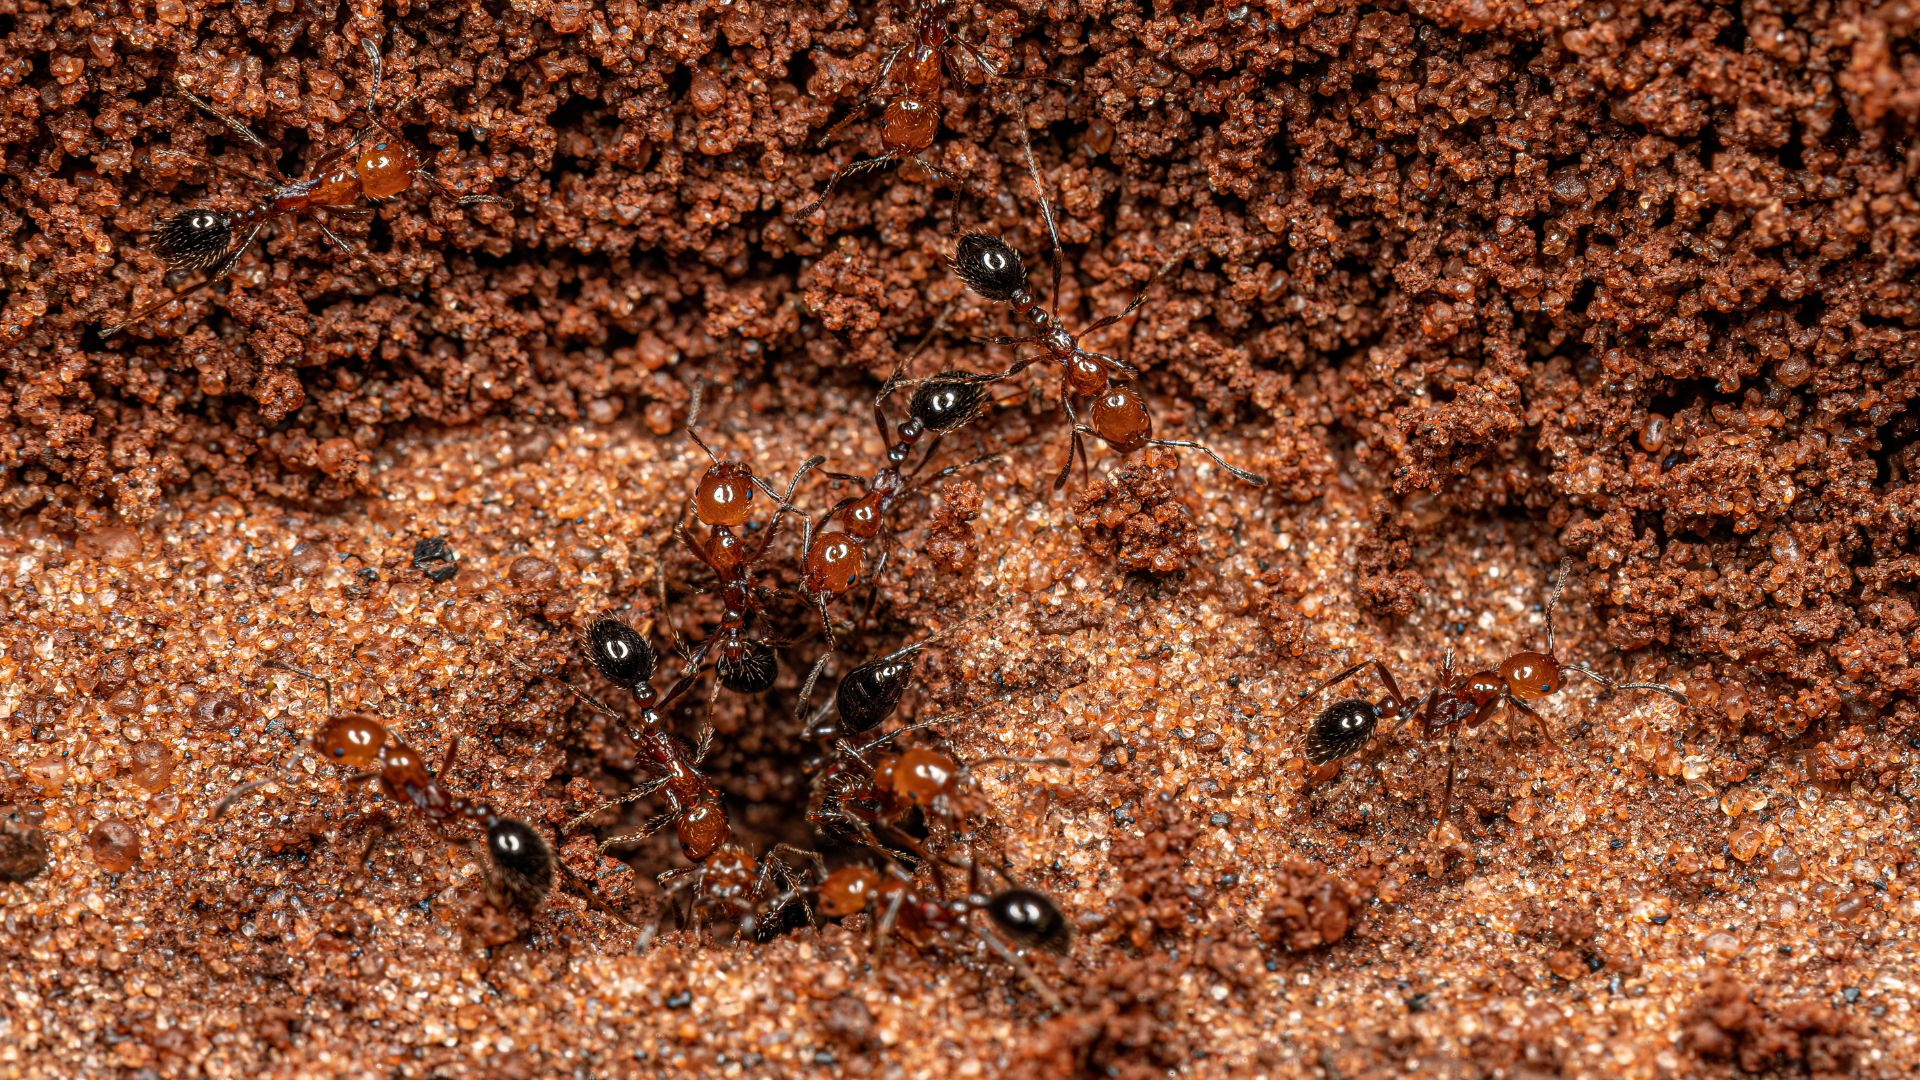 Inspecting for Fire Ants